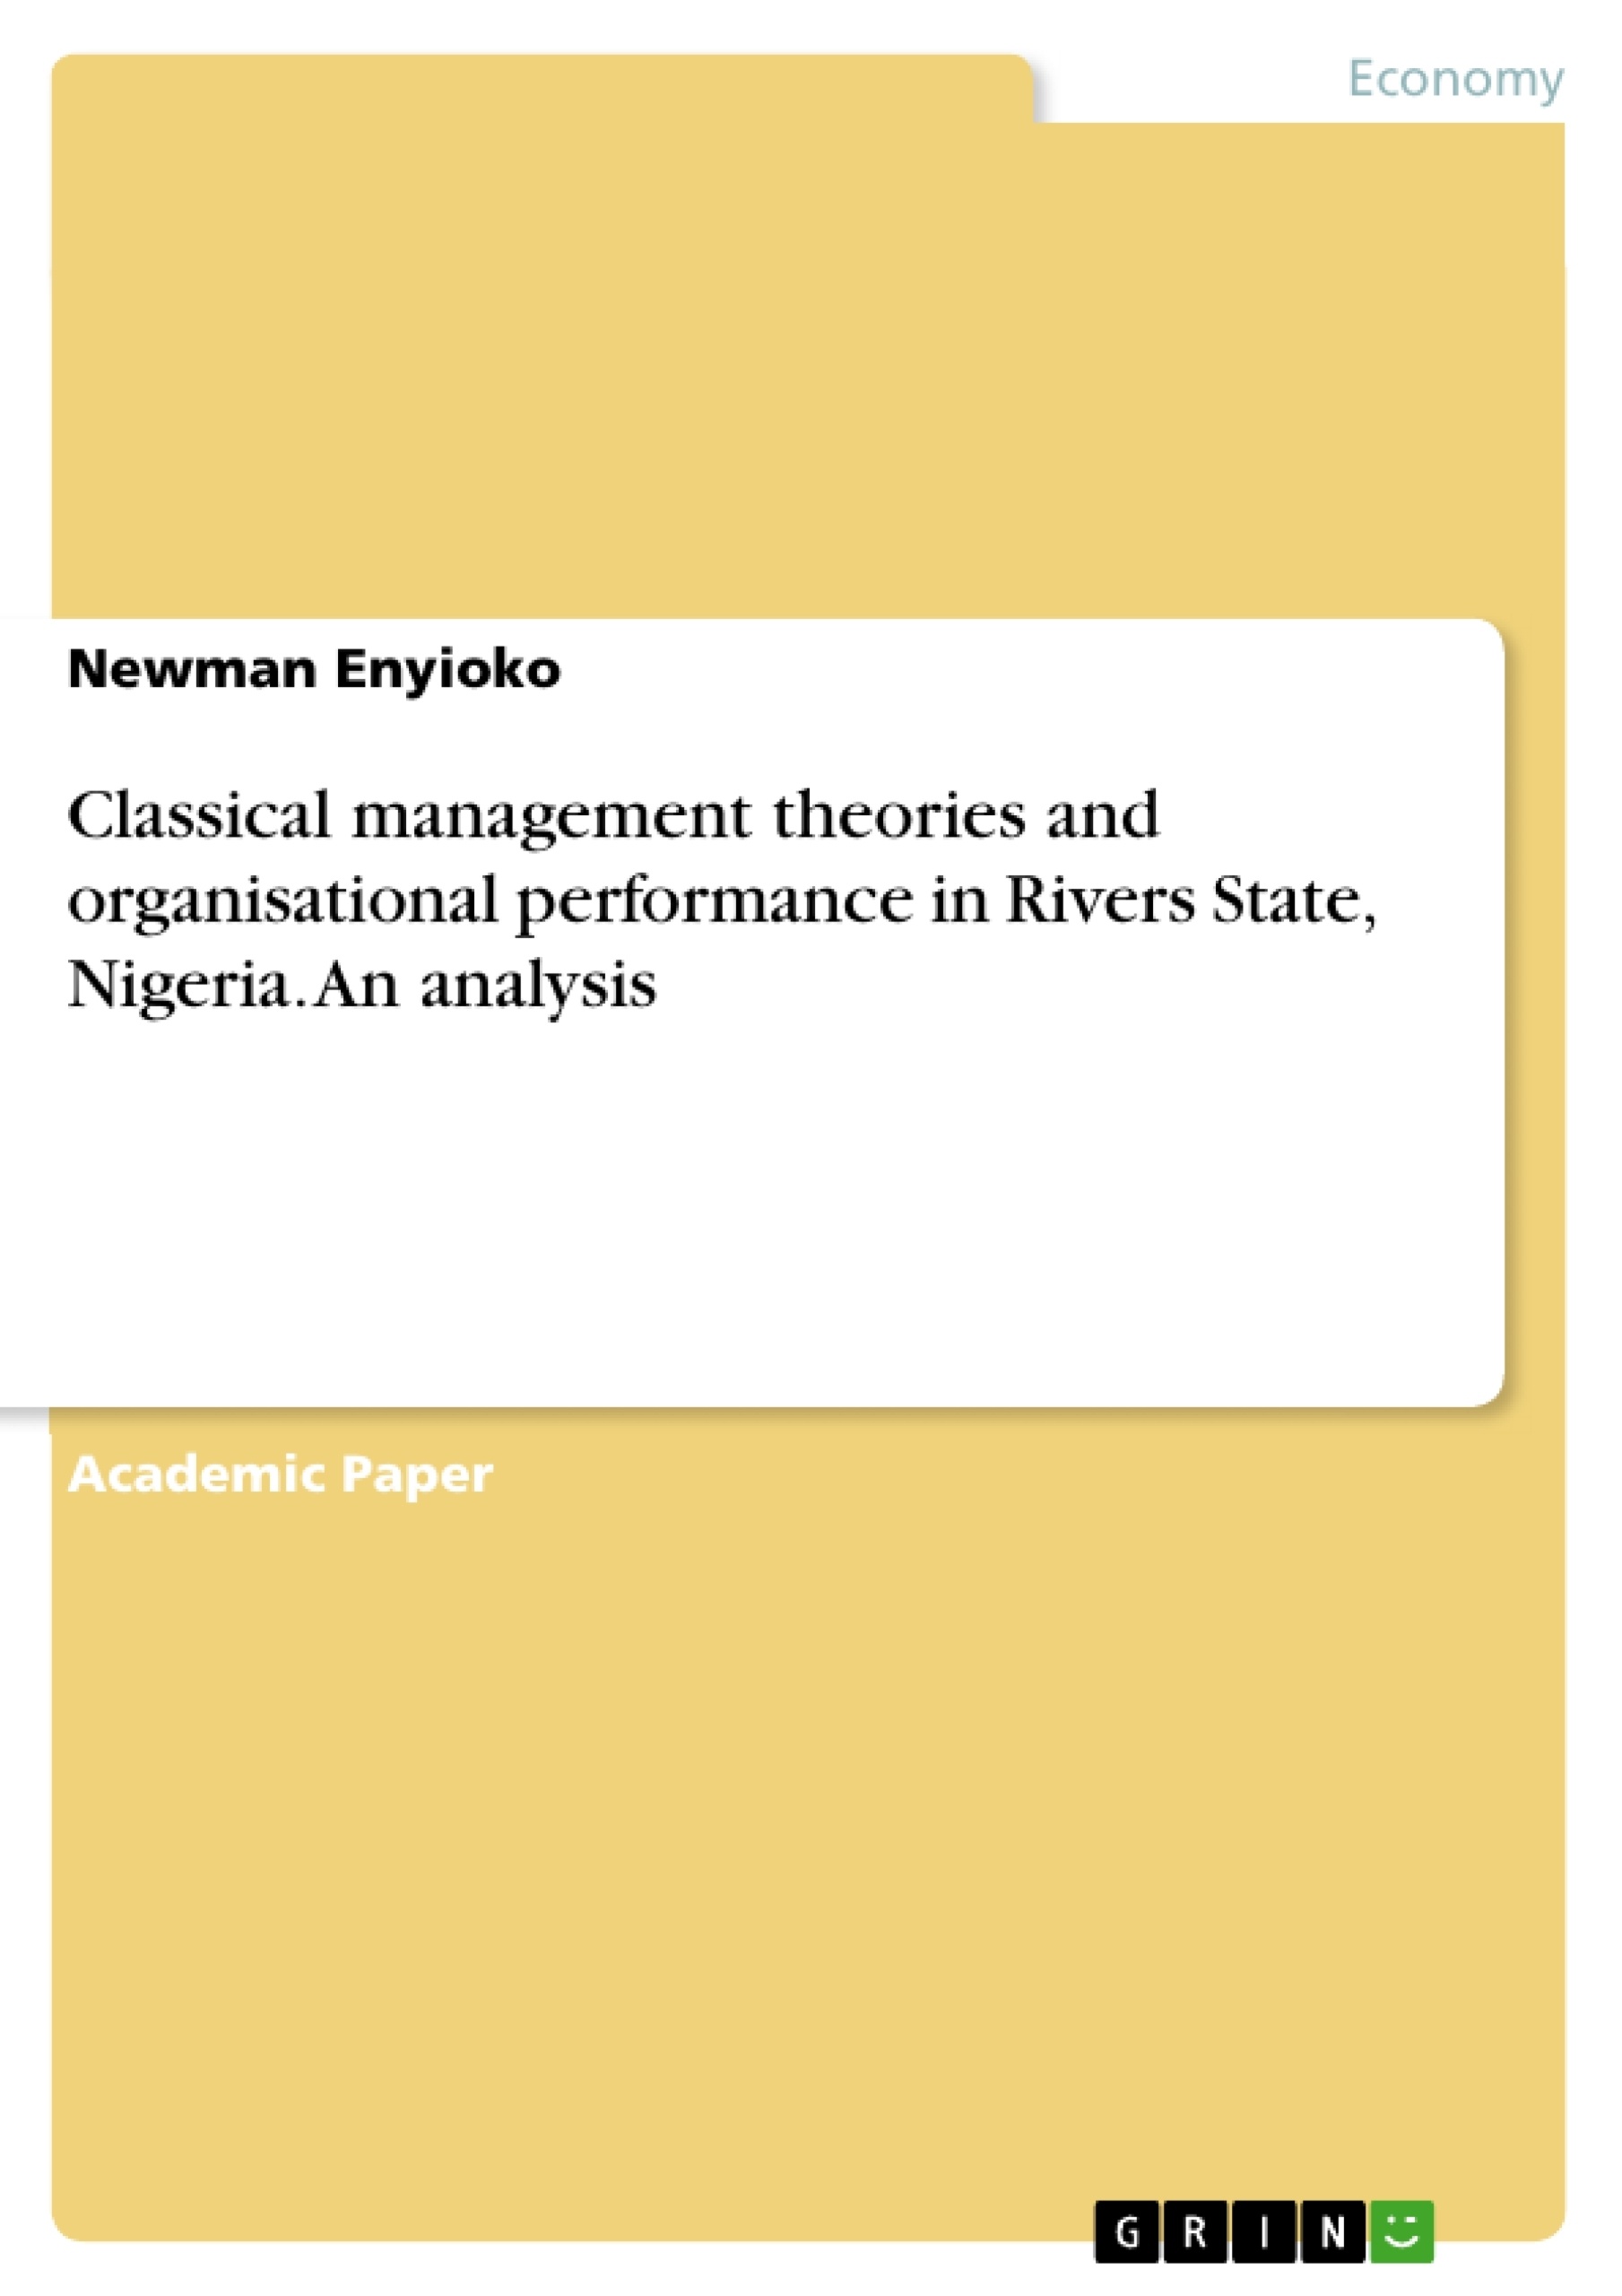 Title: Classical management theories and organisational performance in Rivers State, Nigeria. An analysis